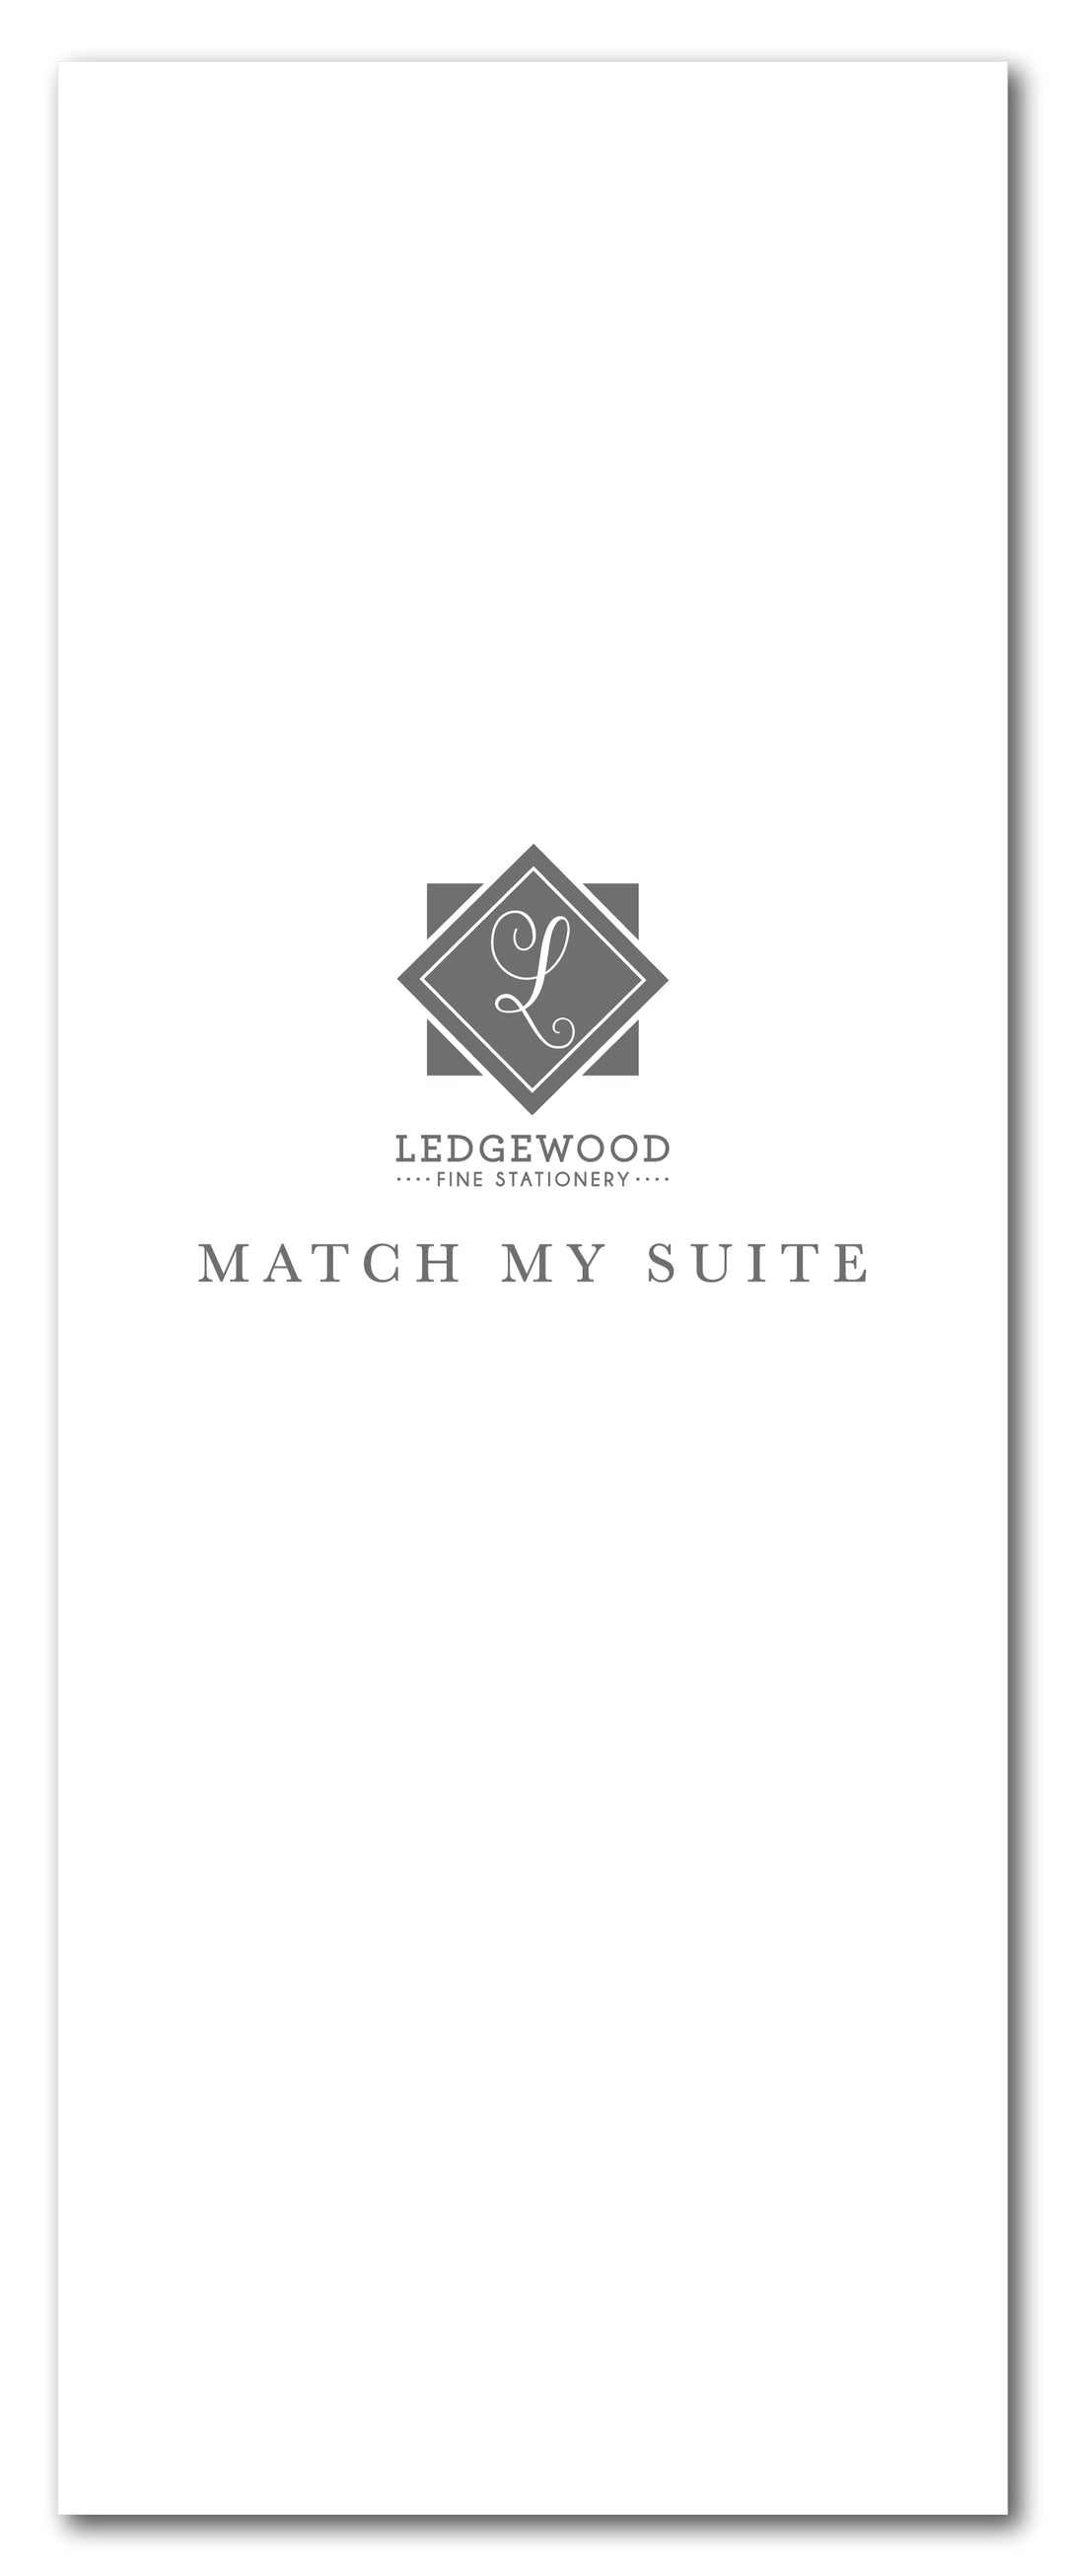 Match My Suite Double-Sided Program